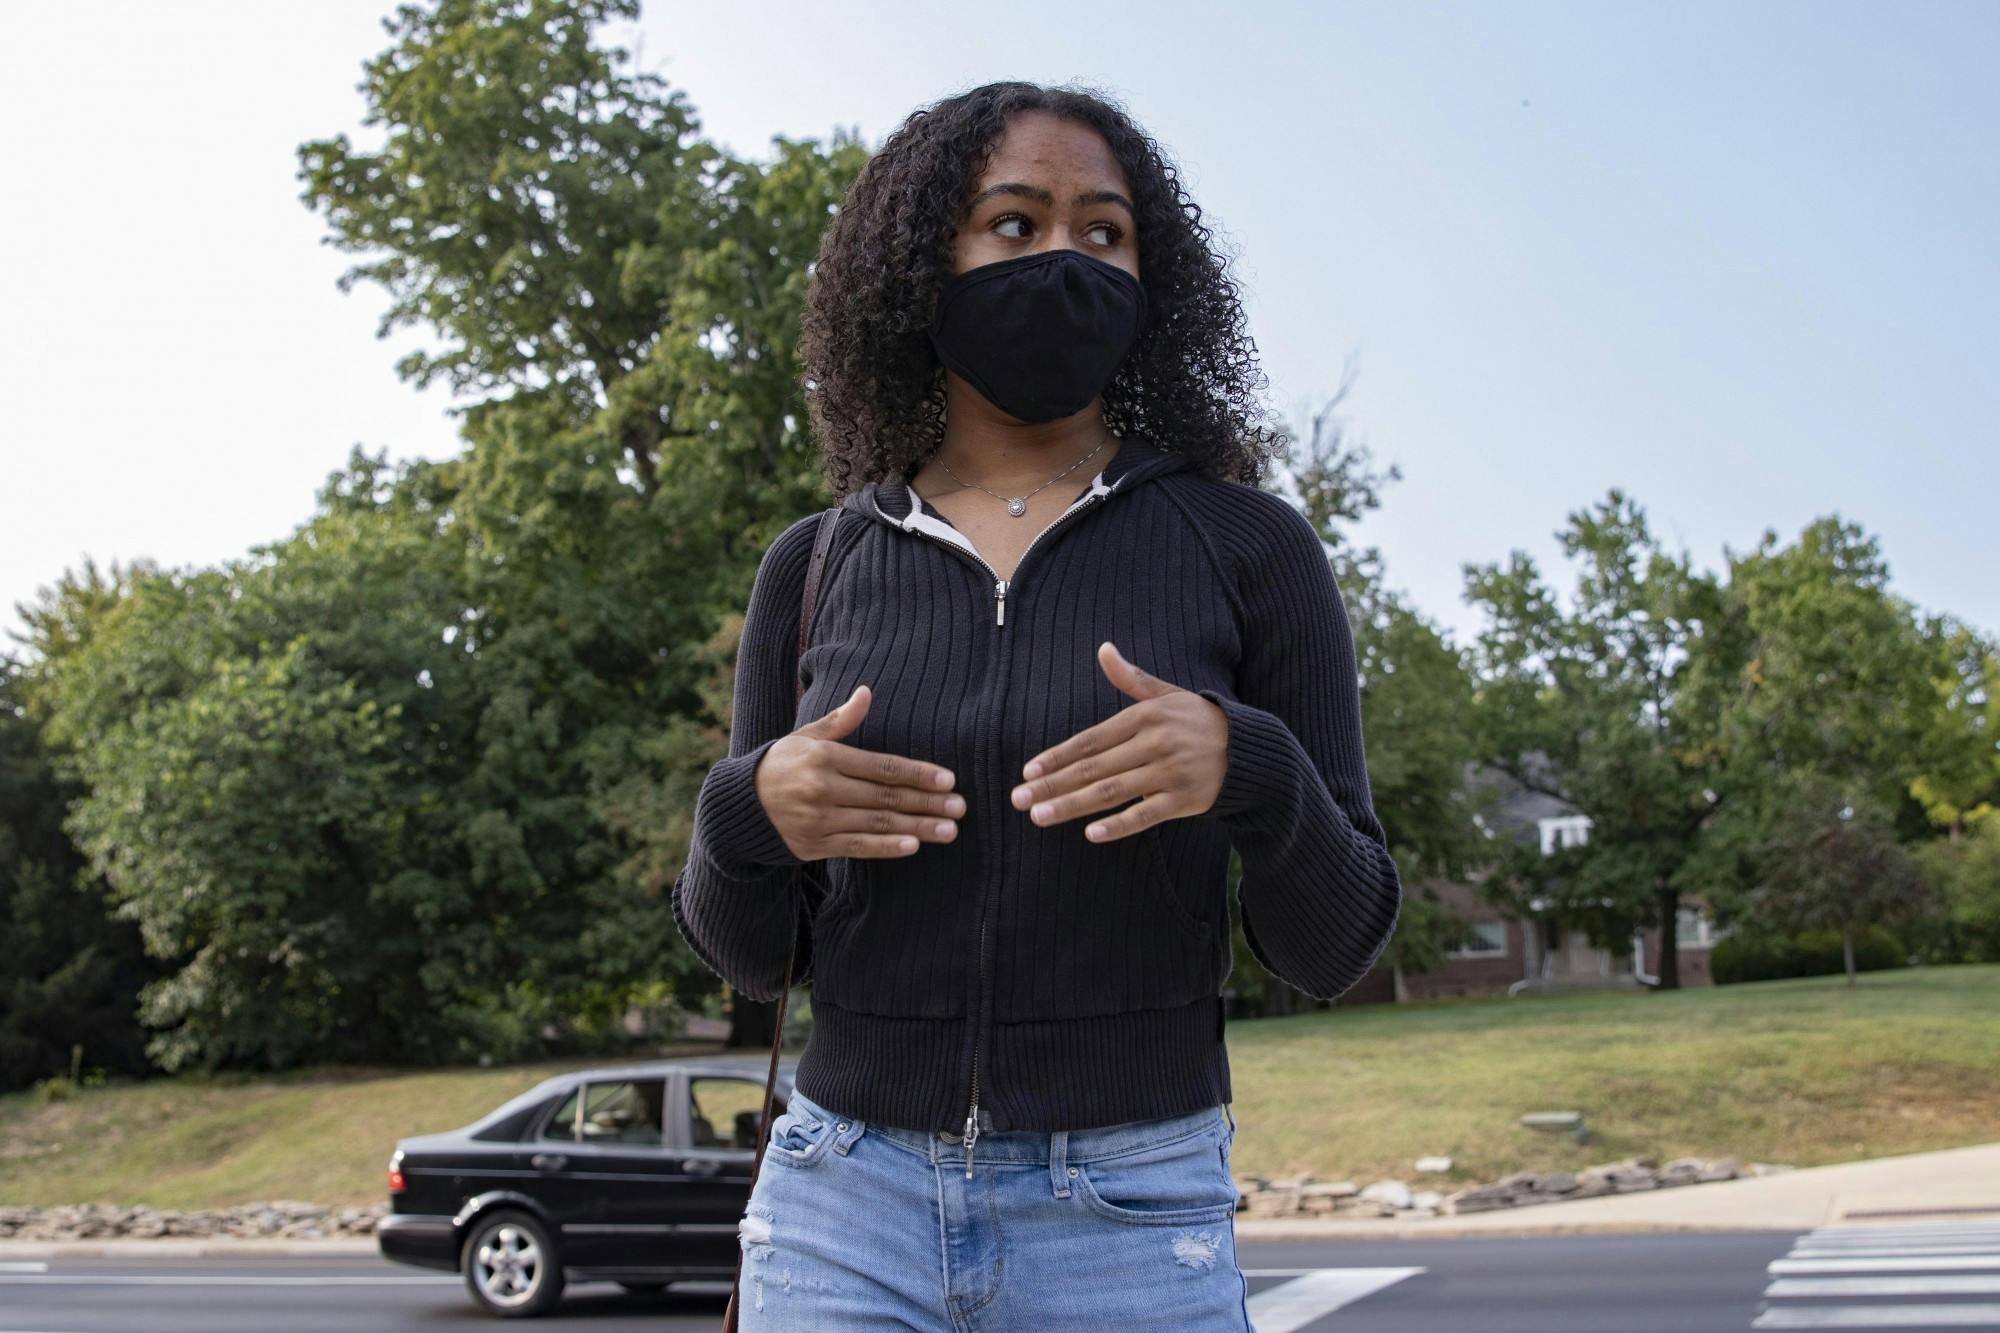 Junior Alice Aluko describes act of bias she experienced Sept. 15 at the corner of 10th Street and Jordan Avenue in Bloomington. “They screamed the n-word,” she said.